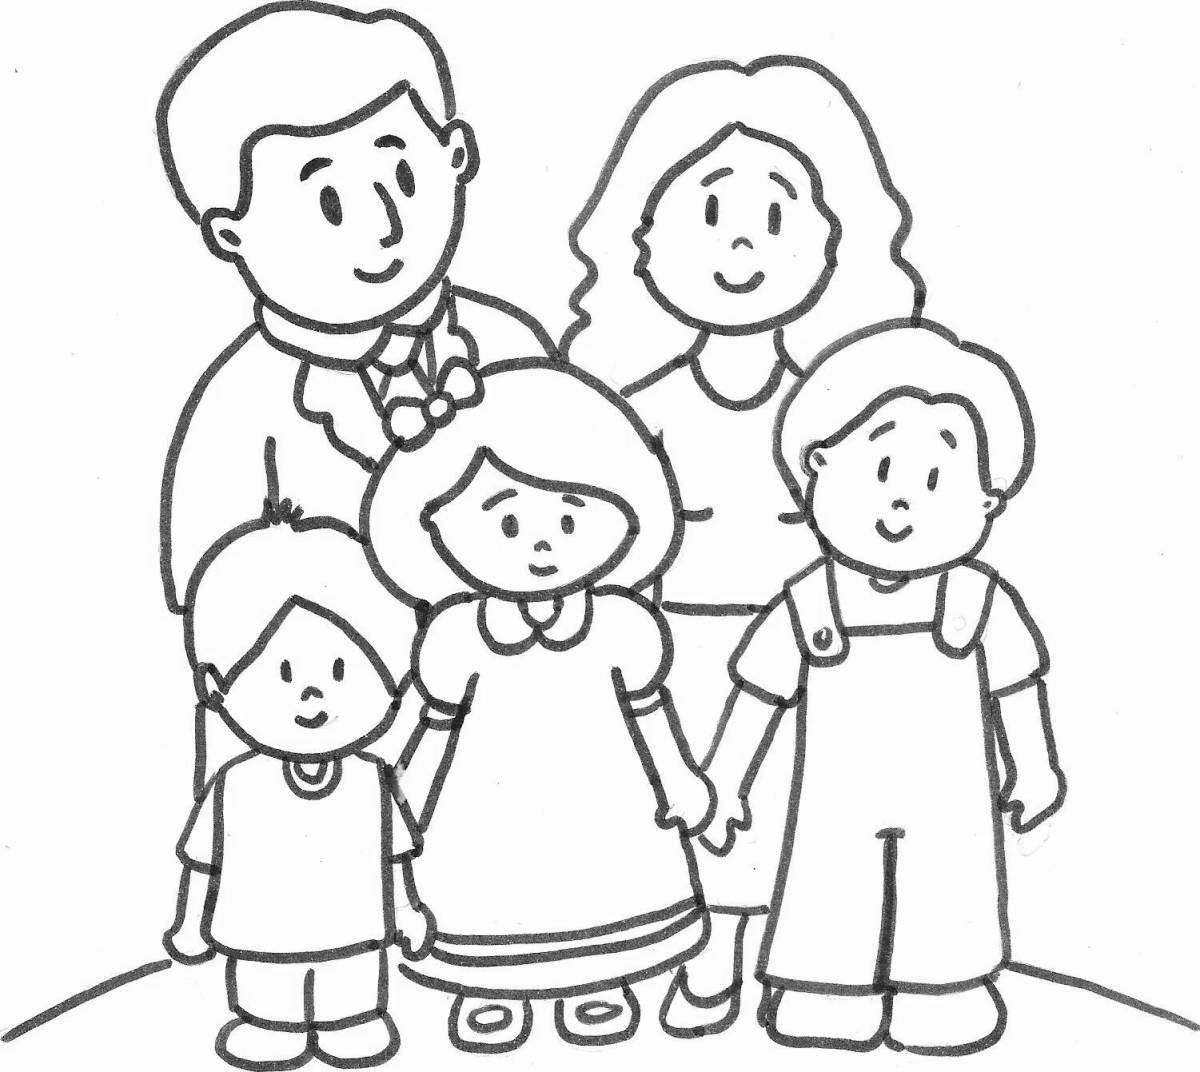 Reunited family coloring book